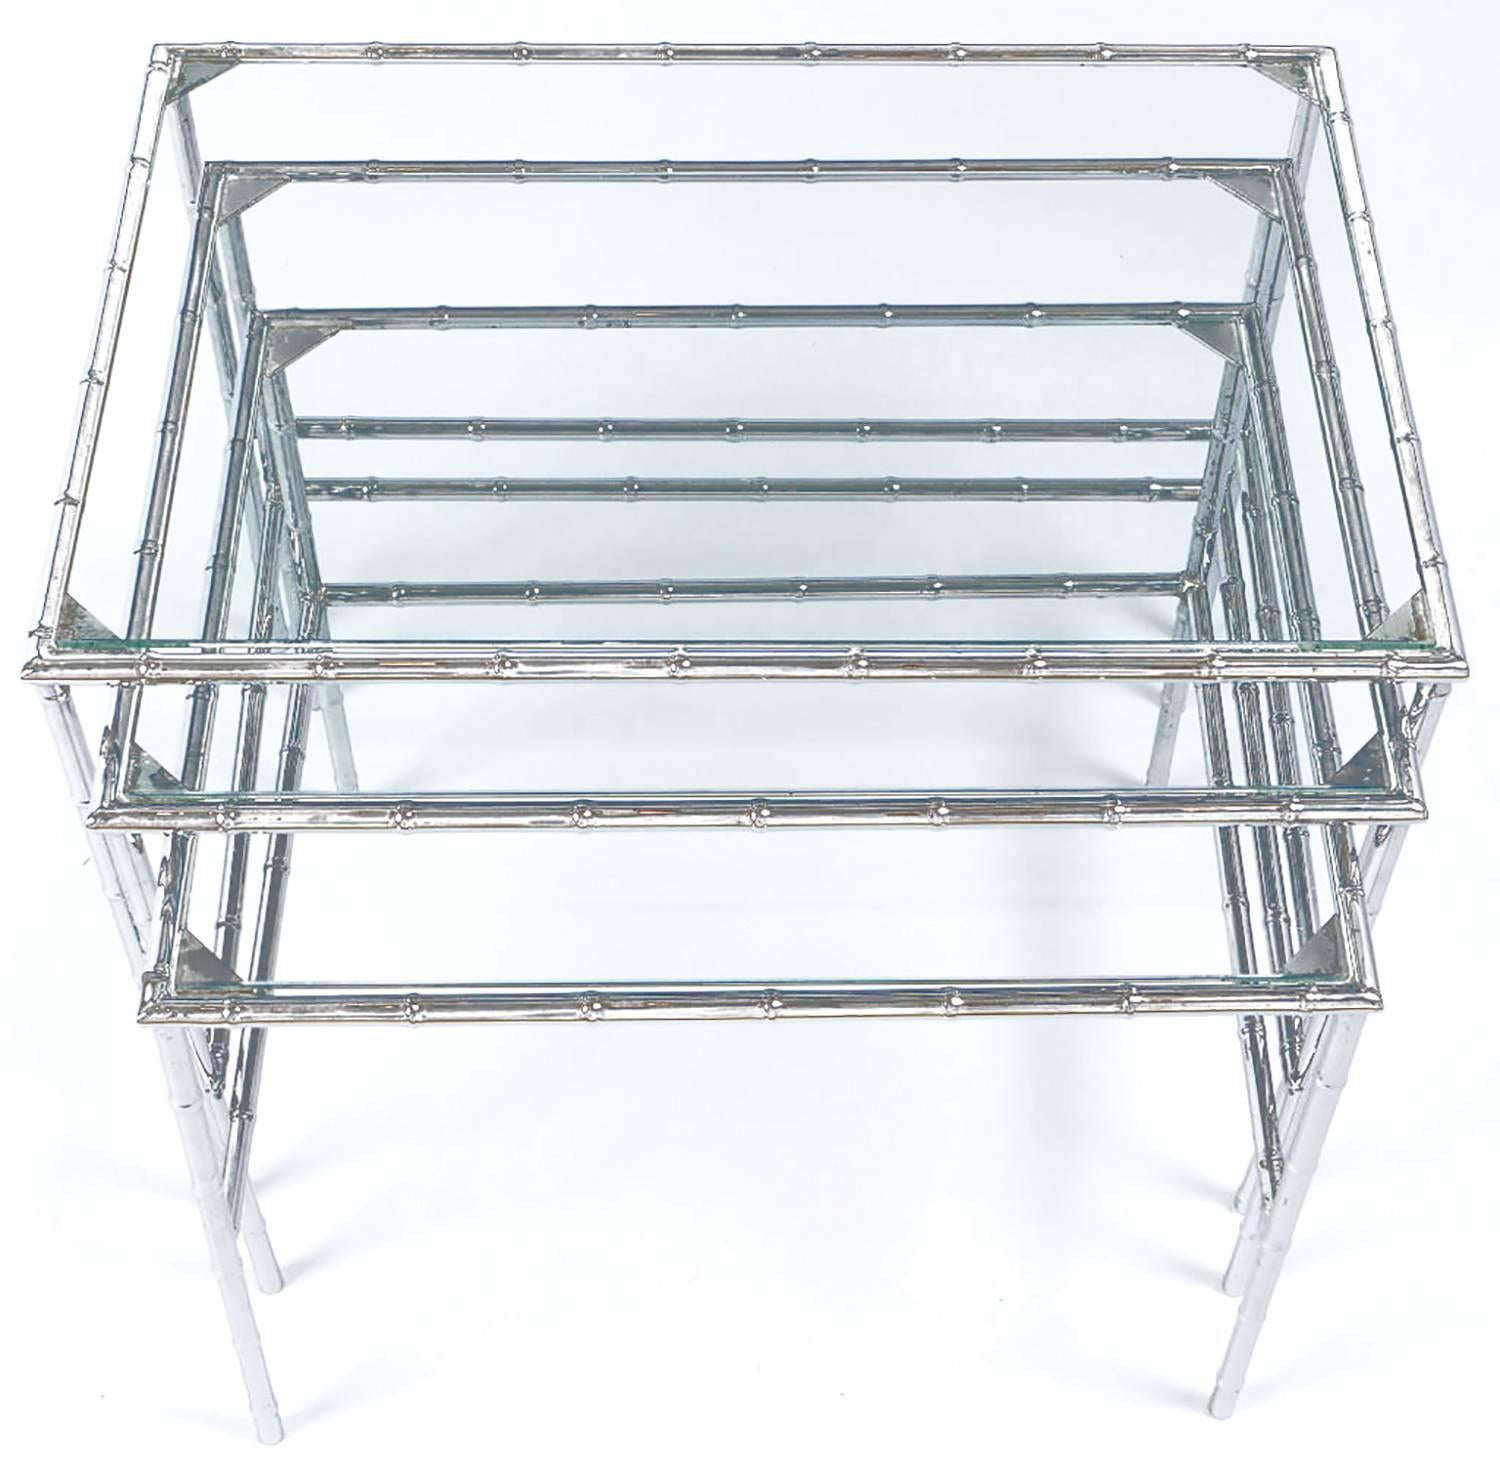 Elegantly framed in faux bamboo chromed steel, this versatile set of nesting tables can be used in many locations.